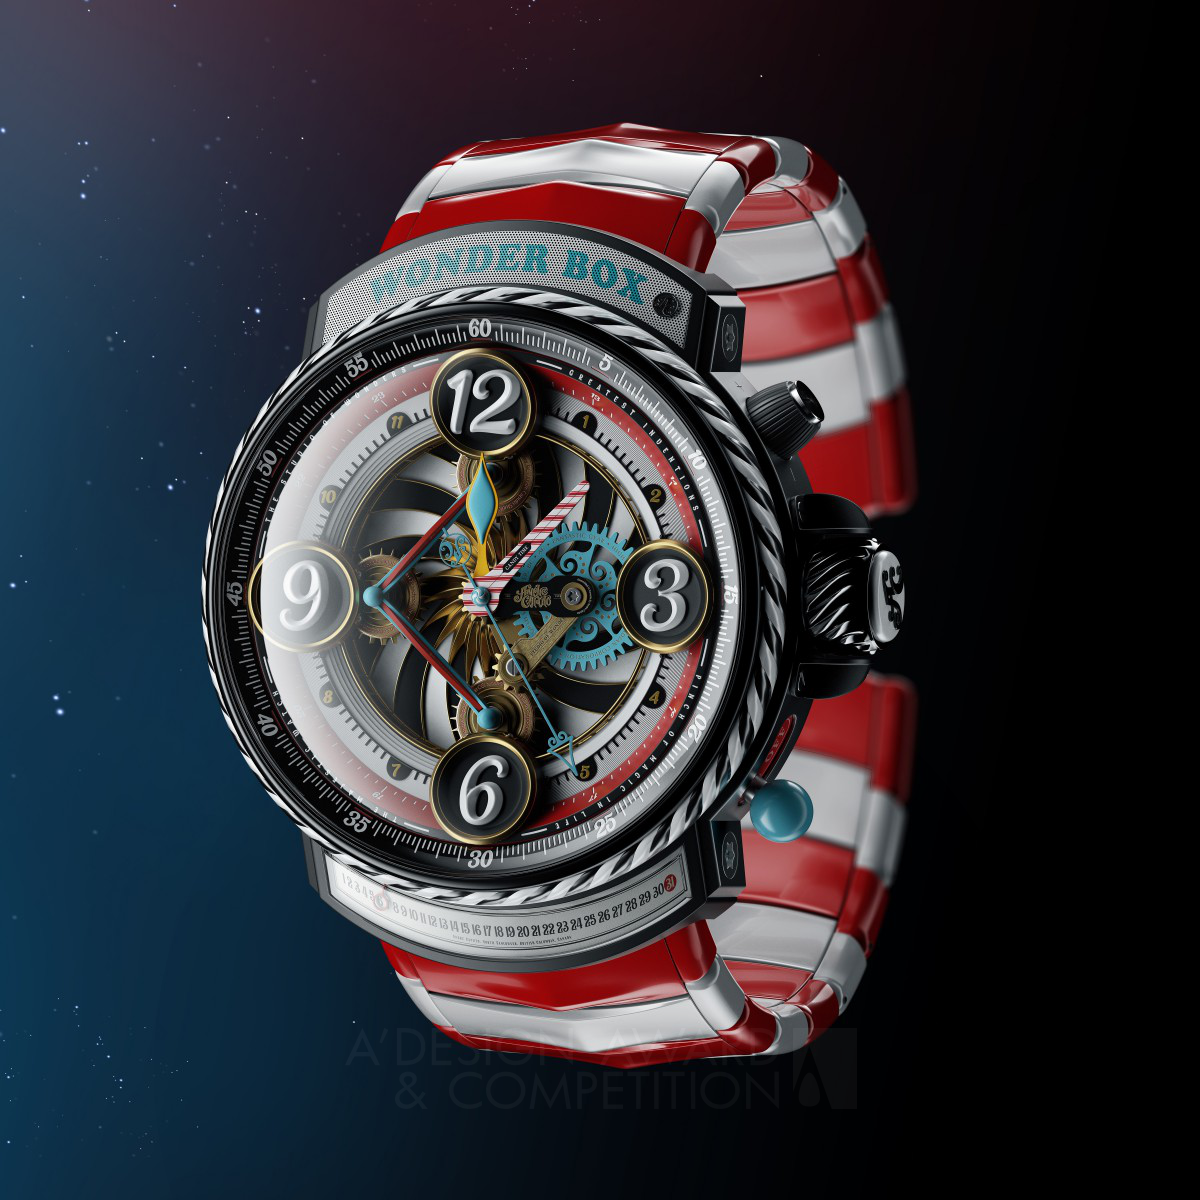 The Majestic Watch Timepiece by Andre Caputo Platinum Computer Graphics, 3D Modeling, Texturing, and Rendering Design Award Winner 2021 